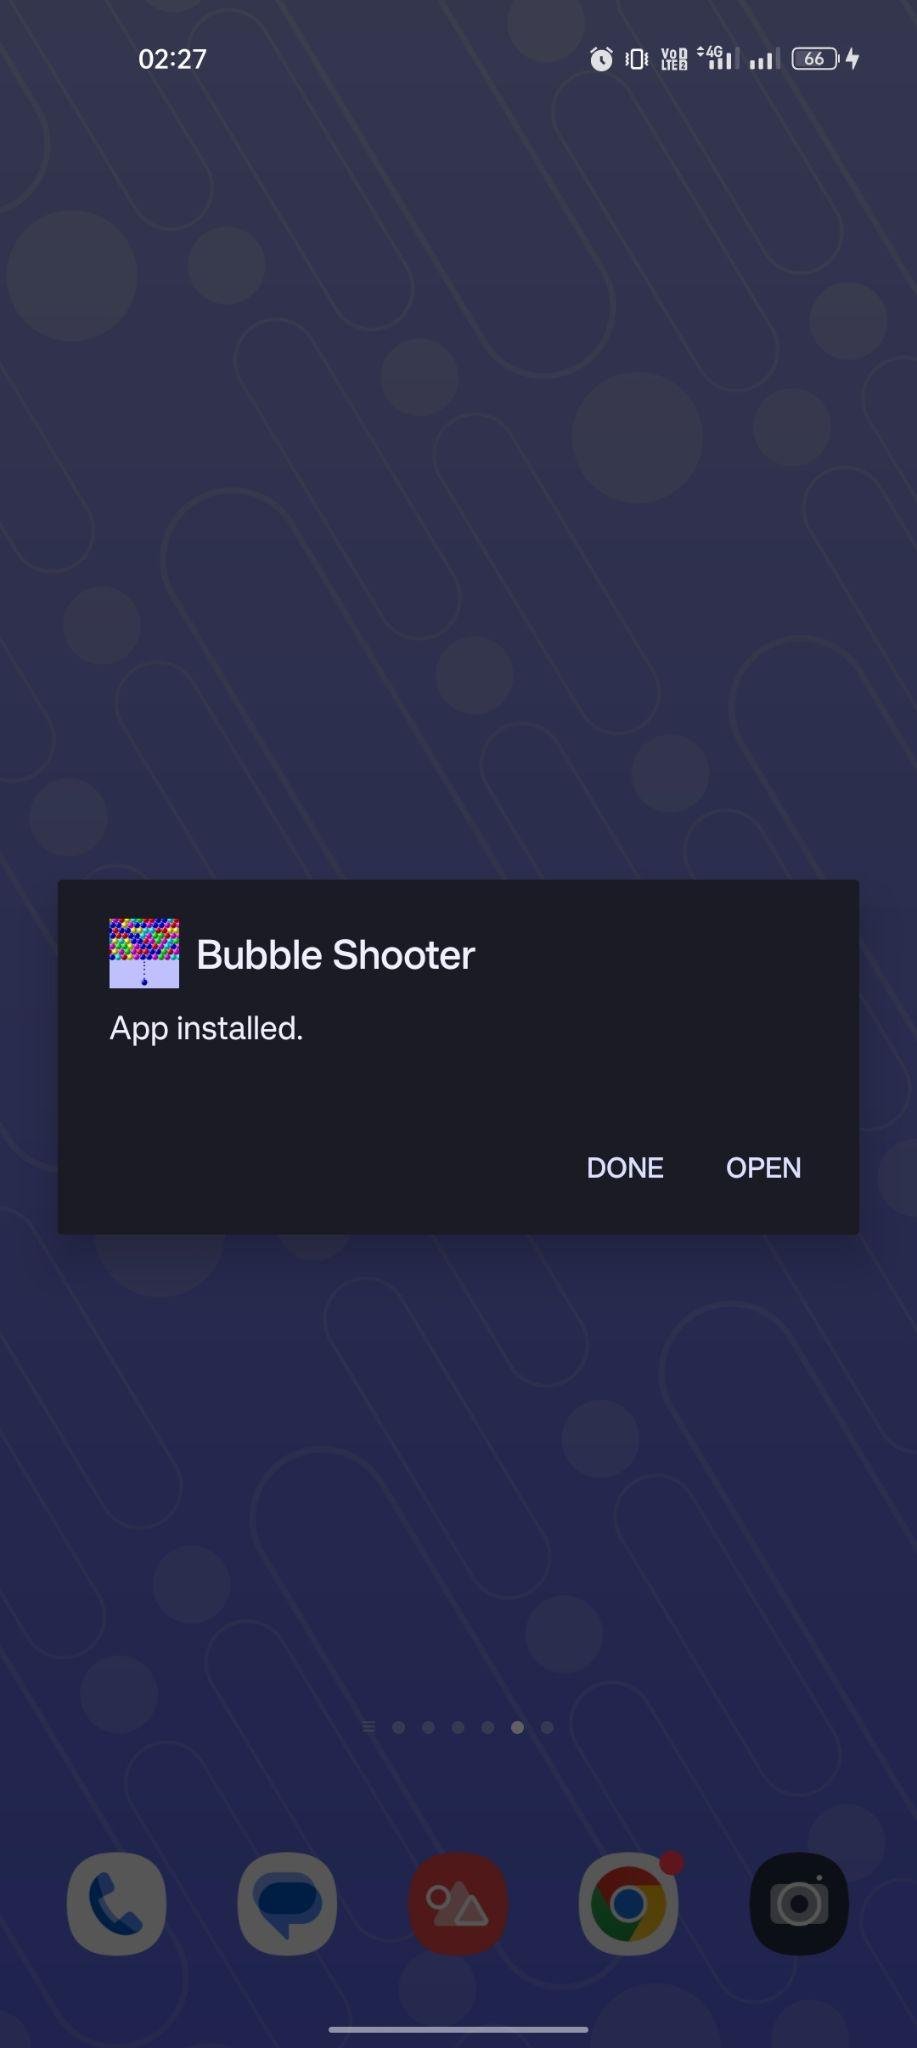 Bubble Shooter apk installed